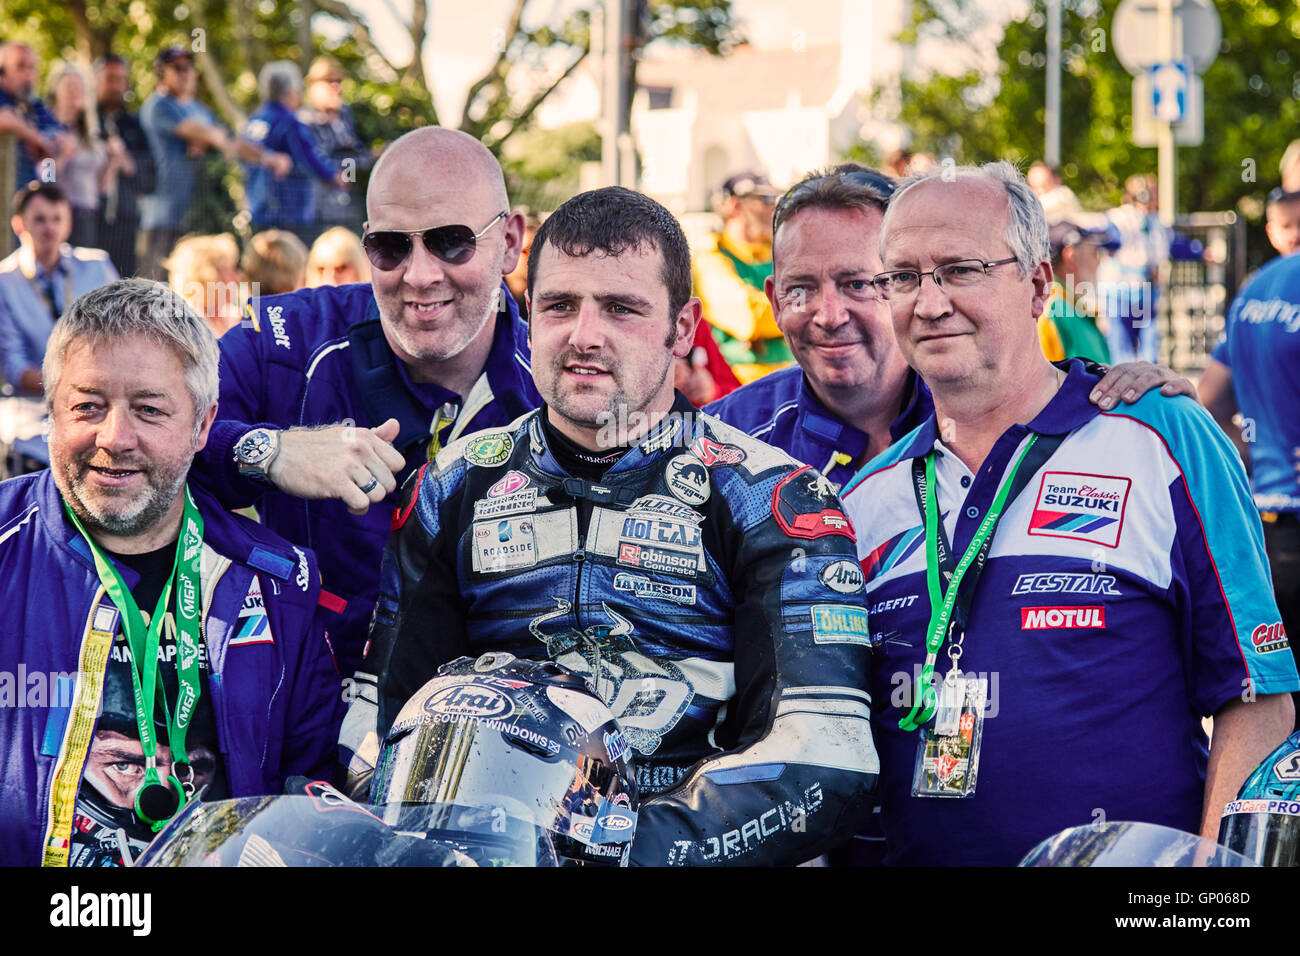 Michael Dunlop winner, in the TT classic superbike race at the Manx Festival of Motorcycling 2016 with team members Stock Photo